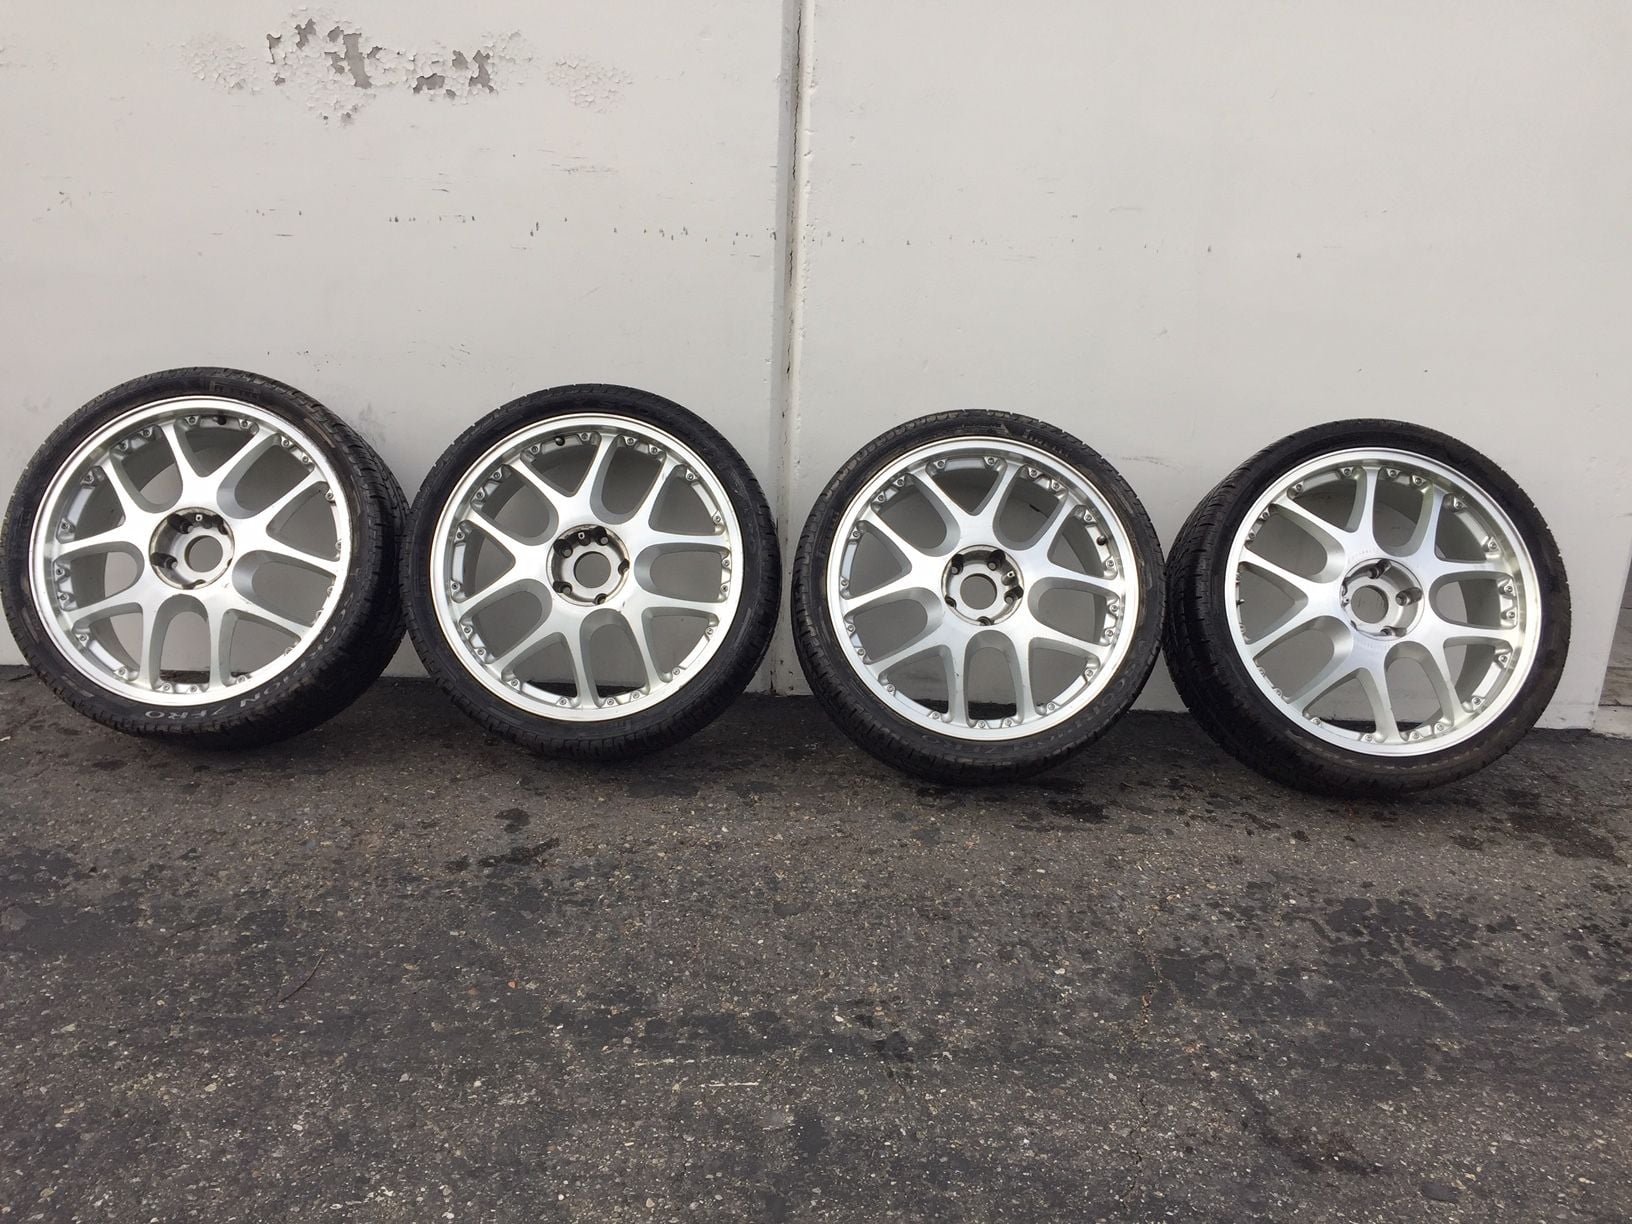 Wheels and Tires/Axles - TSW Exclusive 22x9JJ Wheel Rims 22" Alloy (Set Of 4) Fits Porsche Cayenne/Others - Used - All Years Porsche Cayenne - Tustin, CA 92780, United States